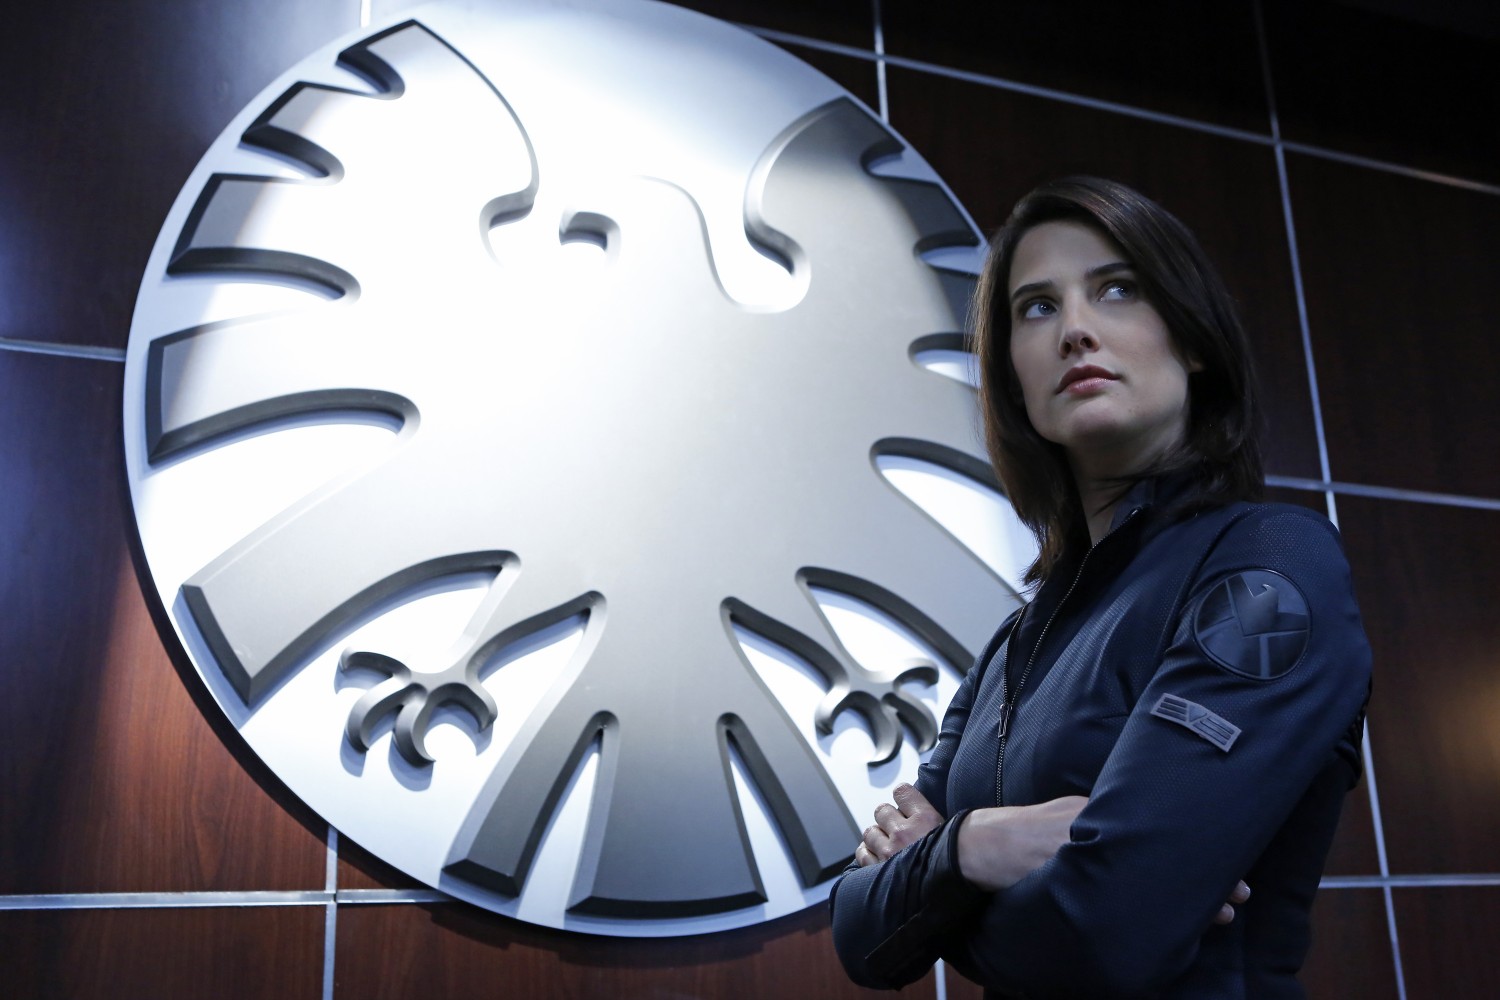 Marvel’s Agents of S.H.I.E.L.D. Episodes 9 and 10